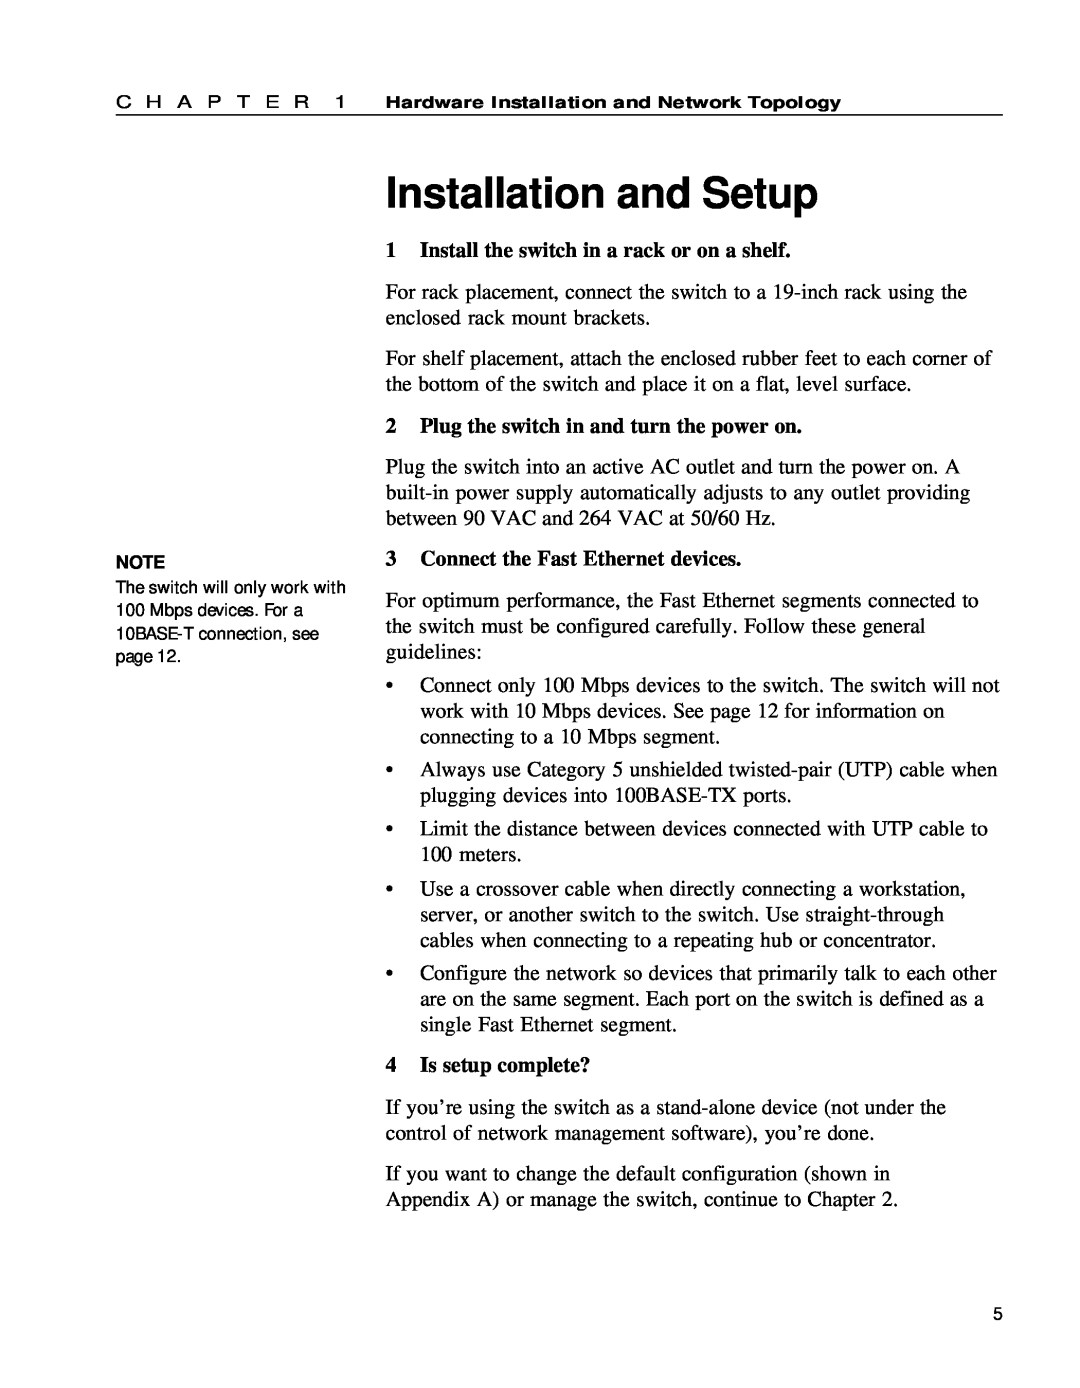 Intel 654655-001 Installation and Setup, Install the switch in a rack or on a shelf, Connect the Fast Ethernet devices 